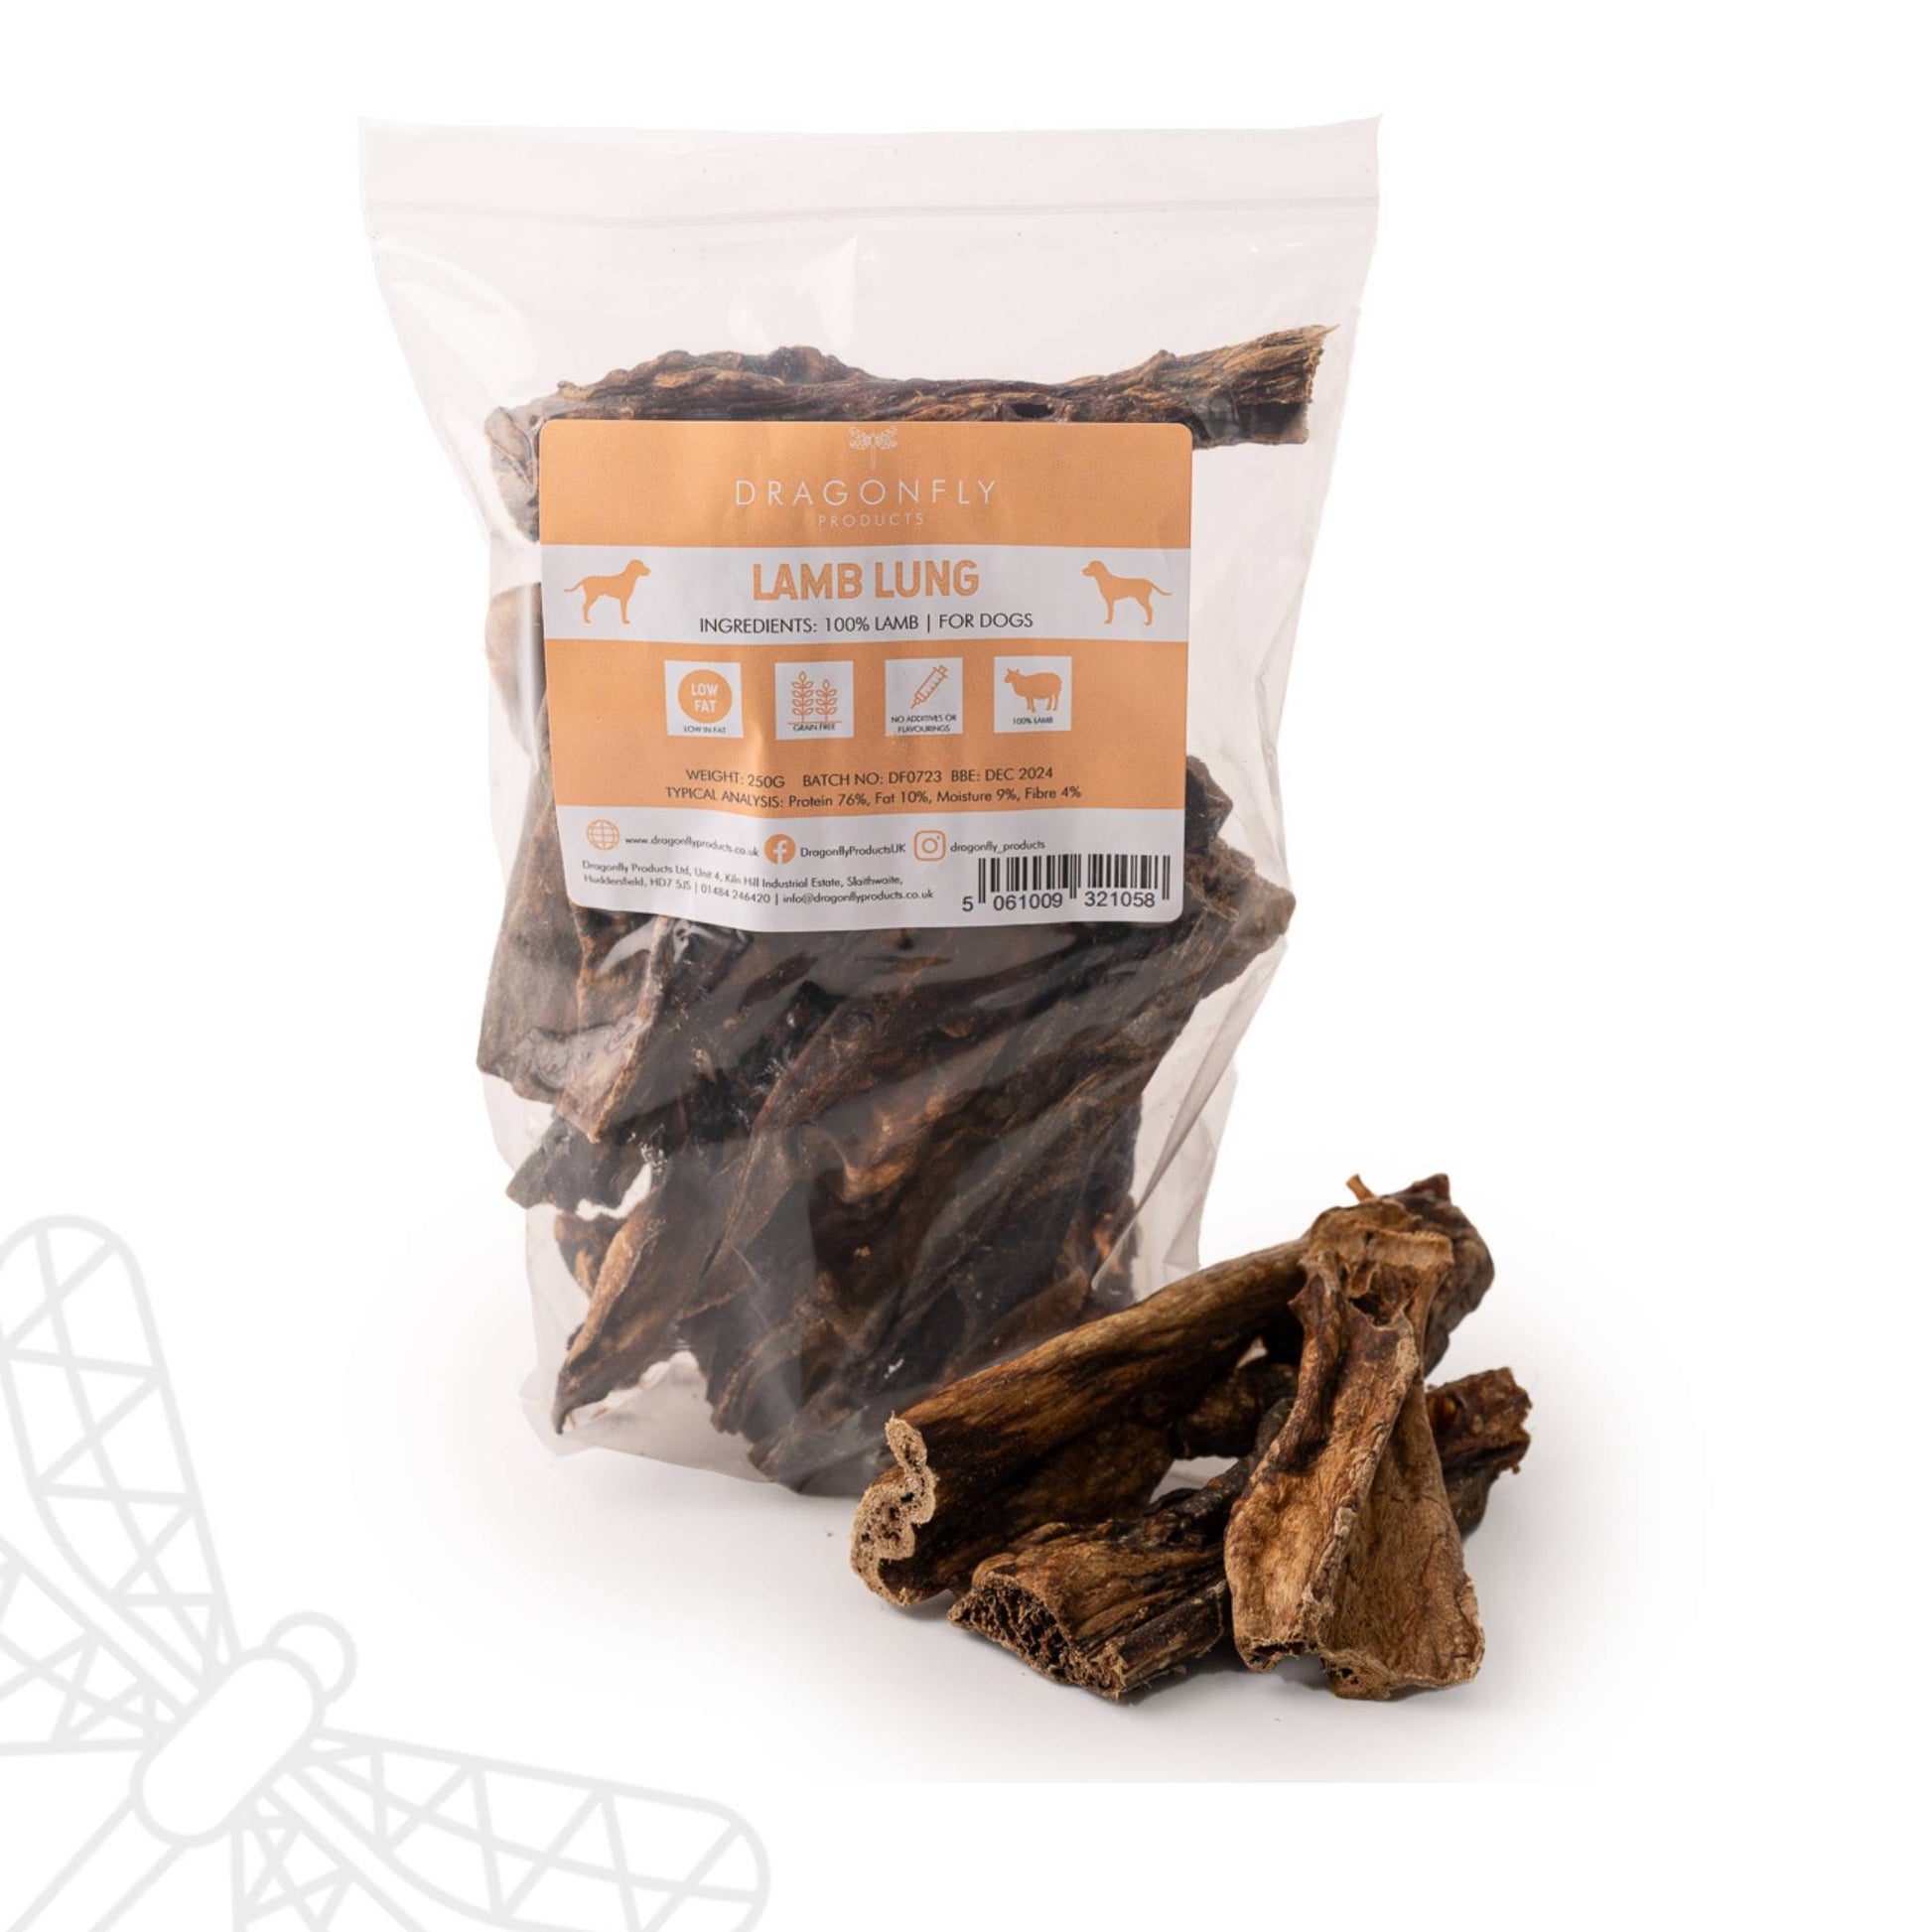 Dried lamb lung for dogs